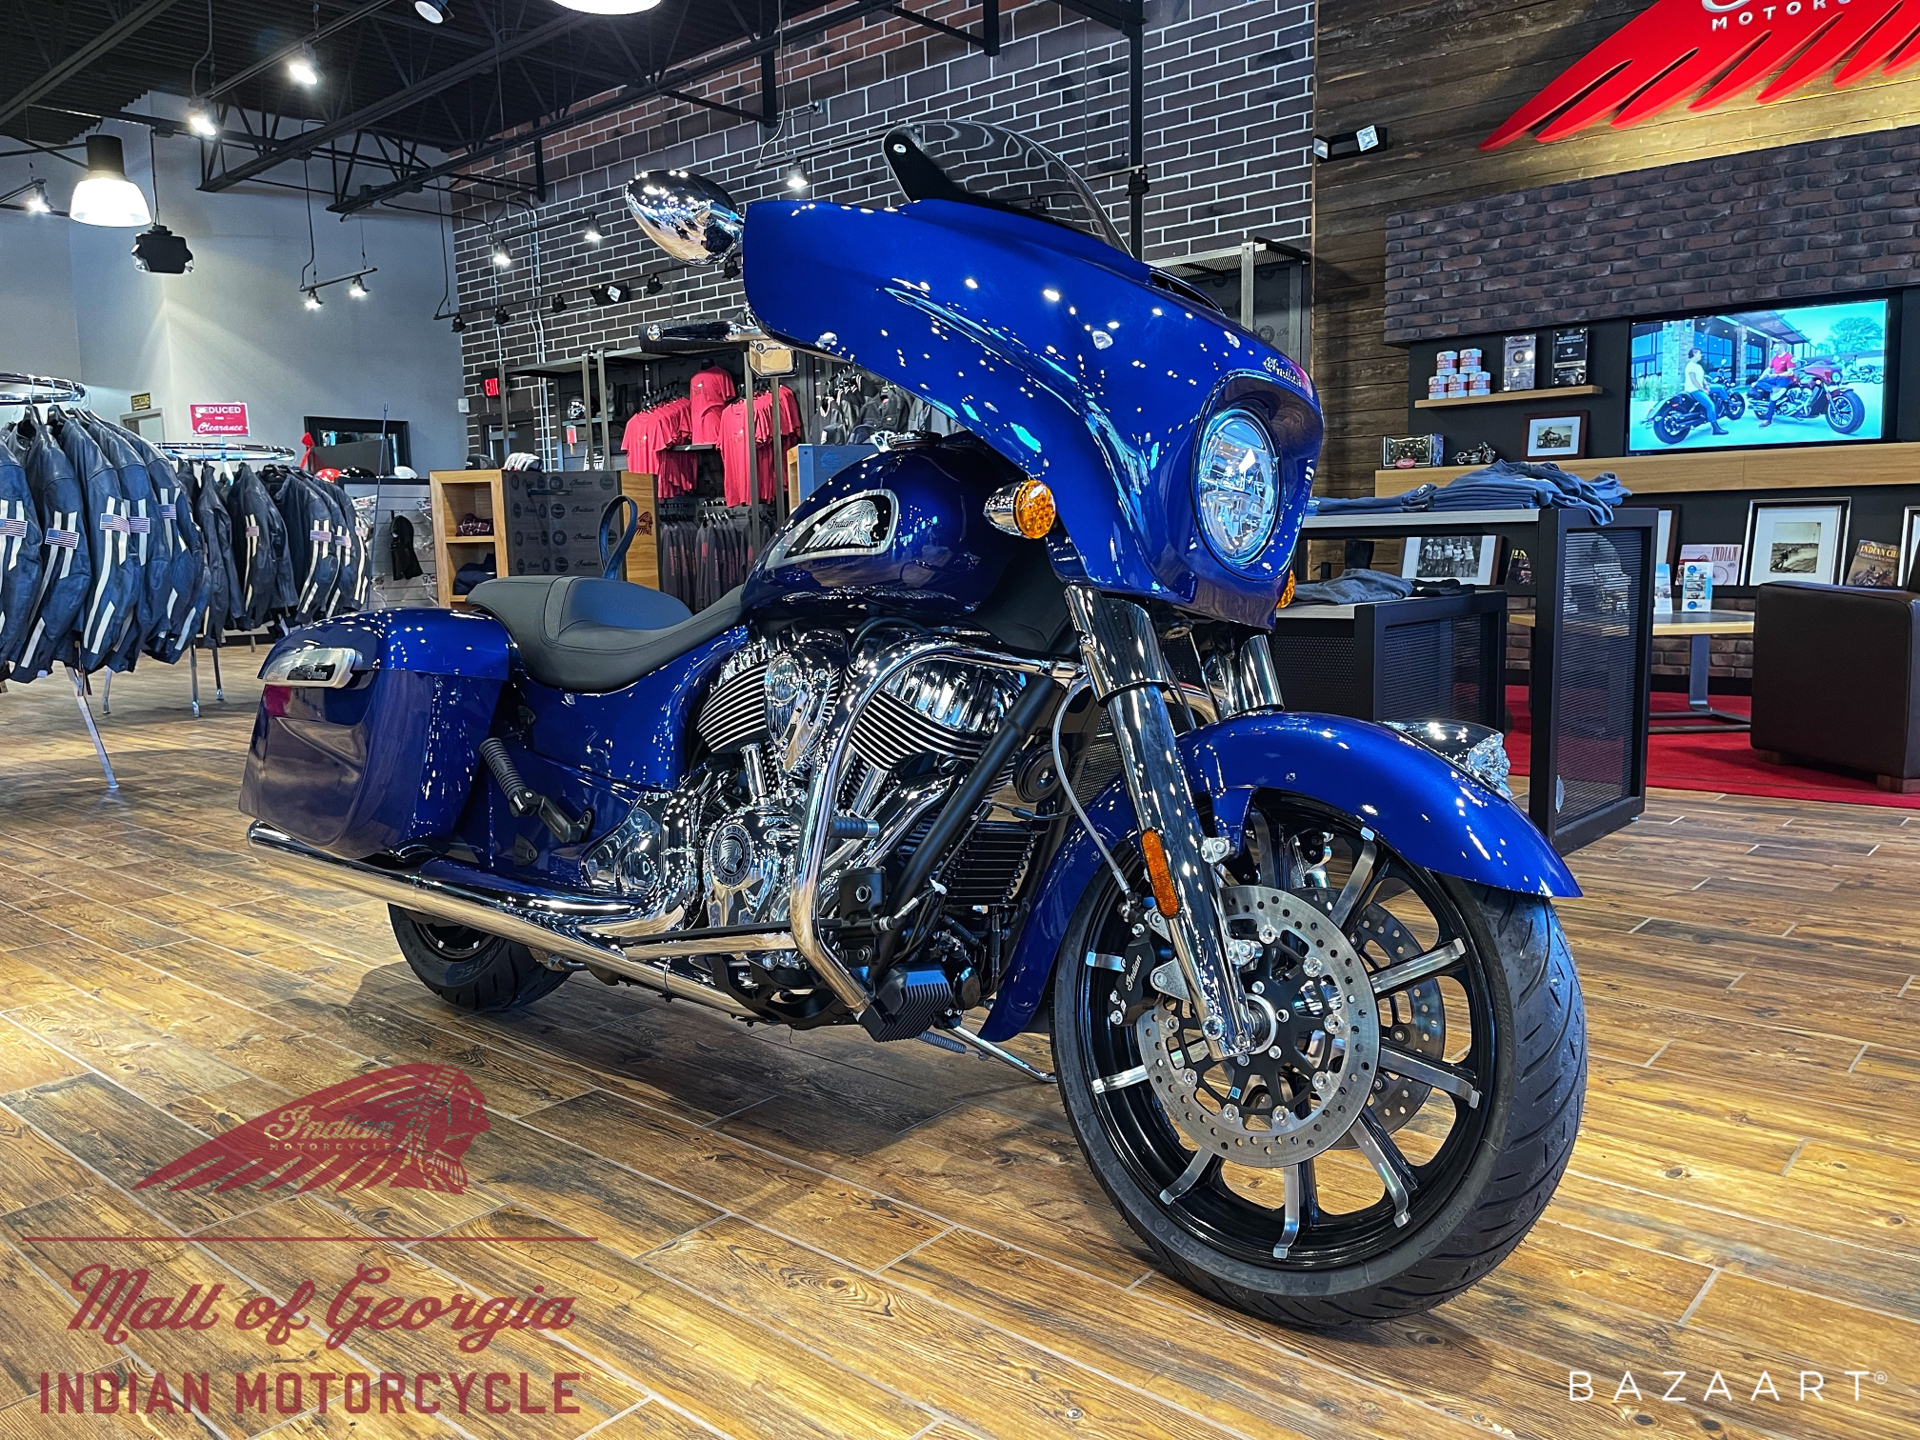 2022 Indian Chieftain® Limited in Buford, Georgia - Photo 3